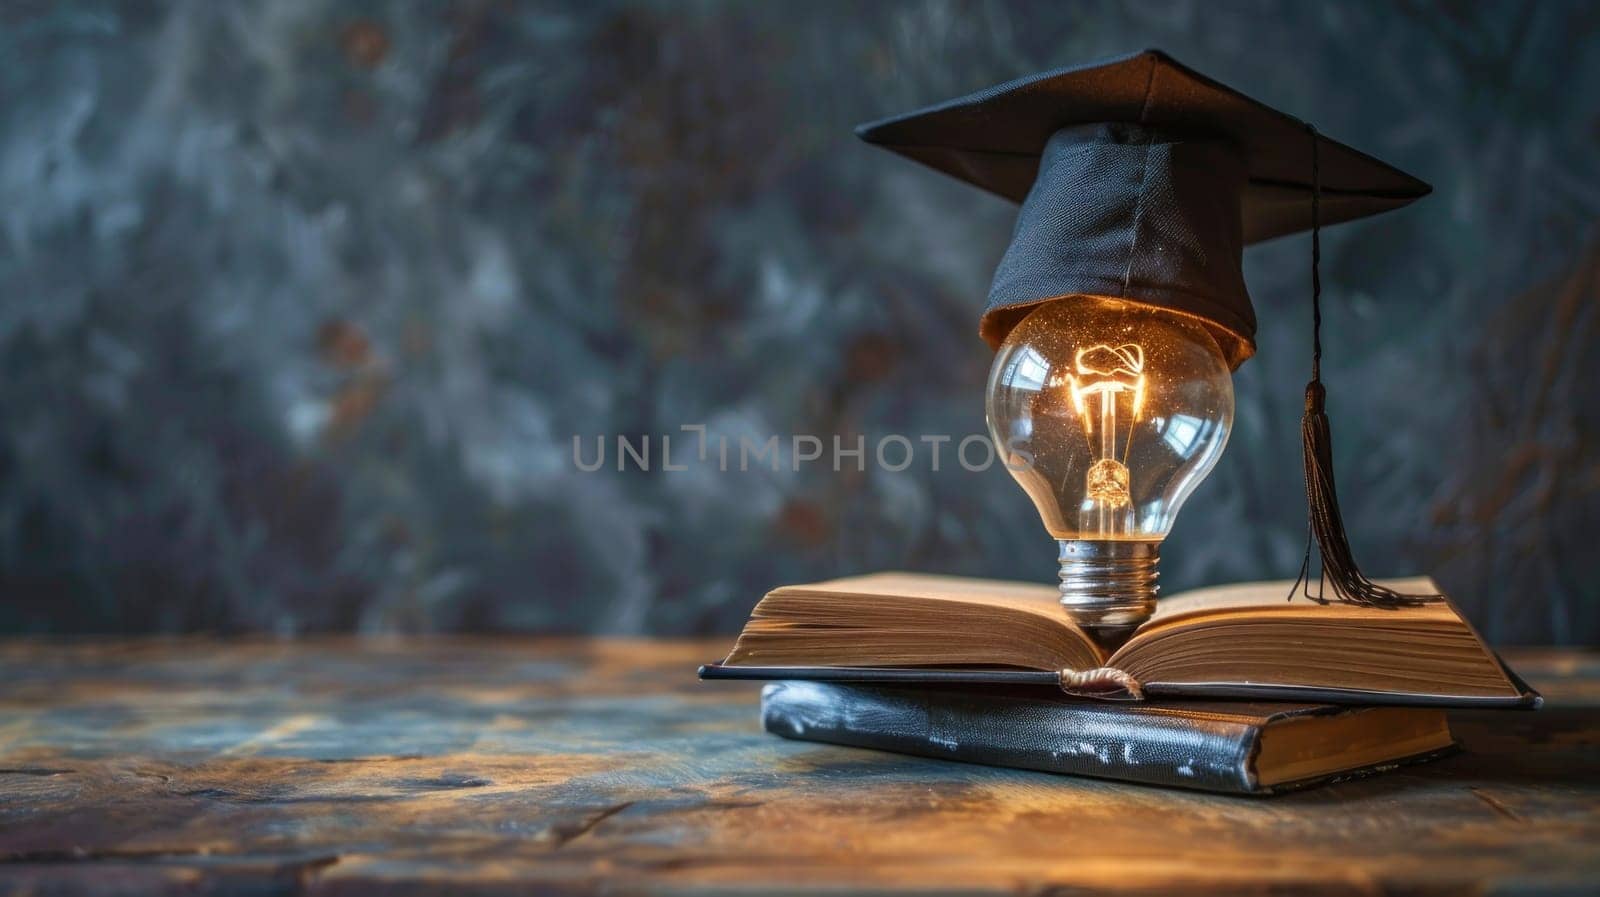 E-learning Graduate Certificate Program Concept Lightbulb on Book with Graduation Hat and Education Icons Concept Internet Education Course Degree.